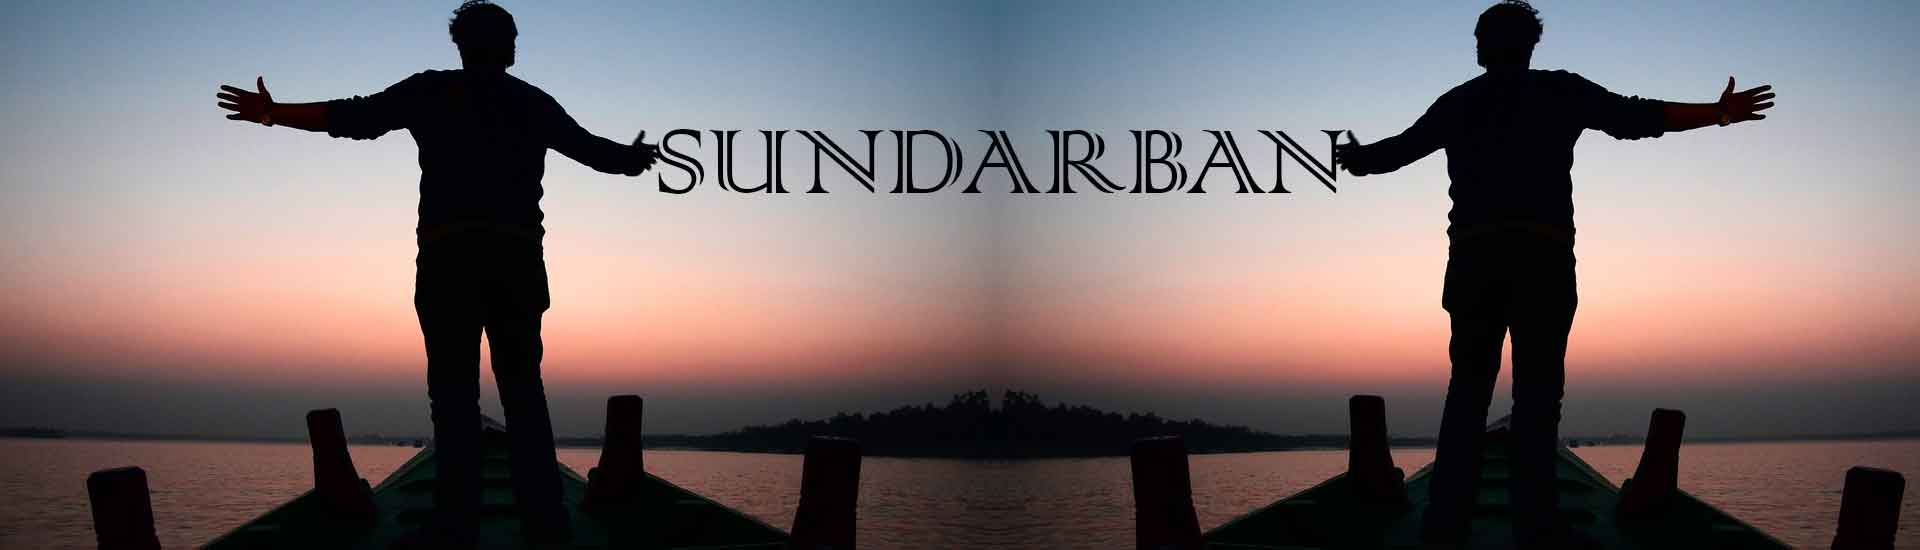 What Things We Should Not Do While Sundarban Visit?